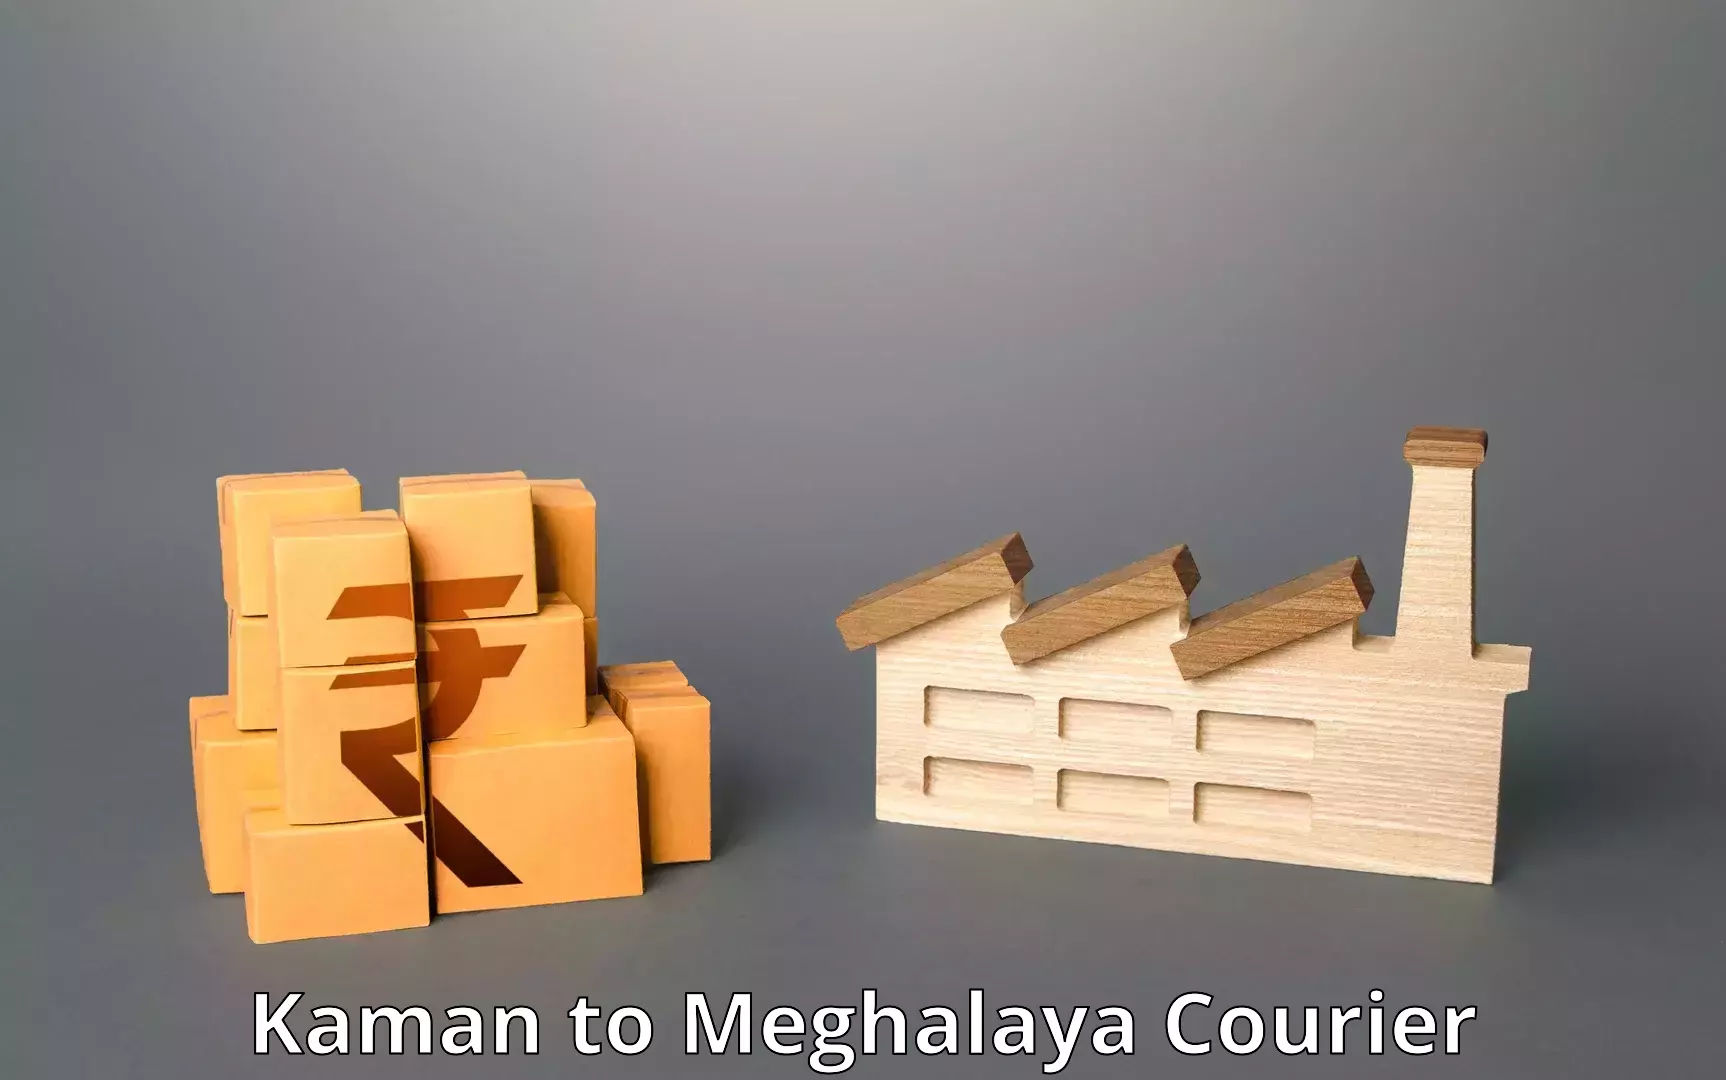 Package delivery network Kaman to Meghalaya